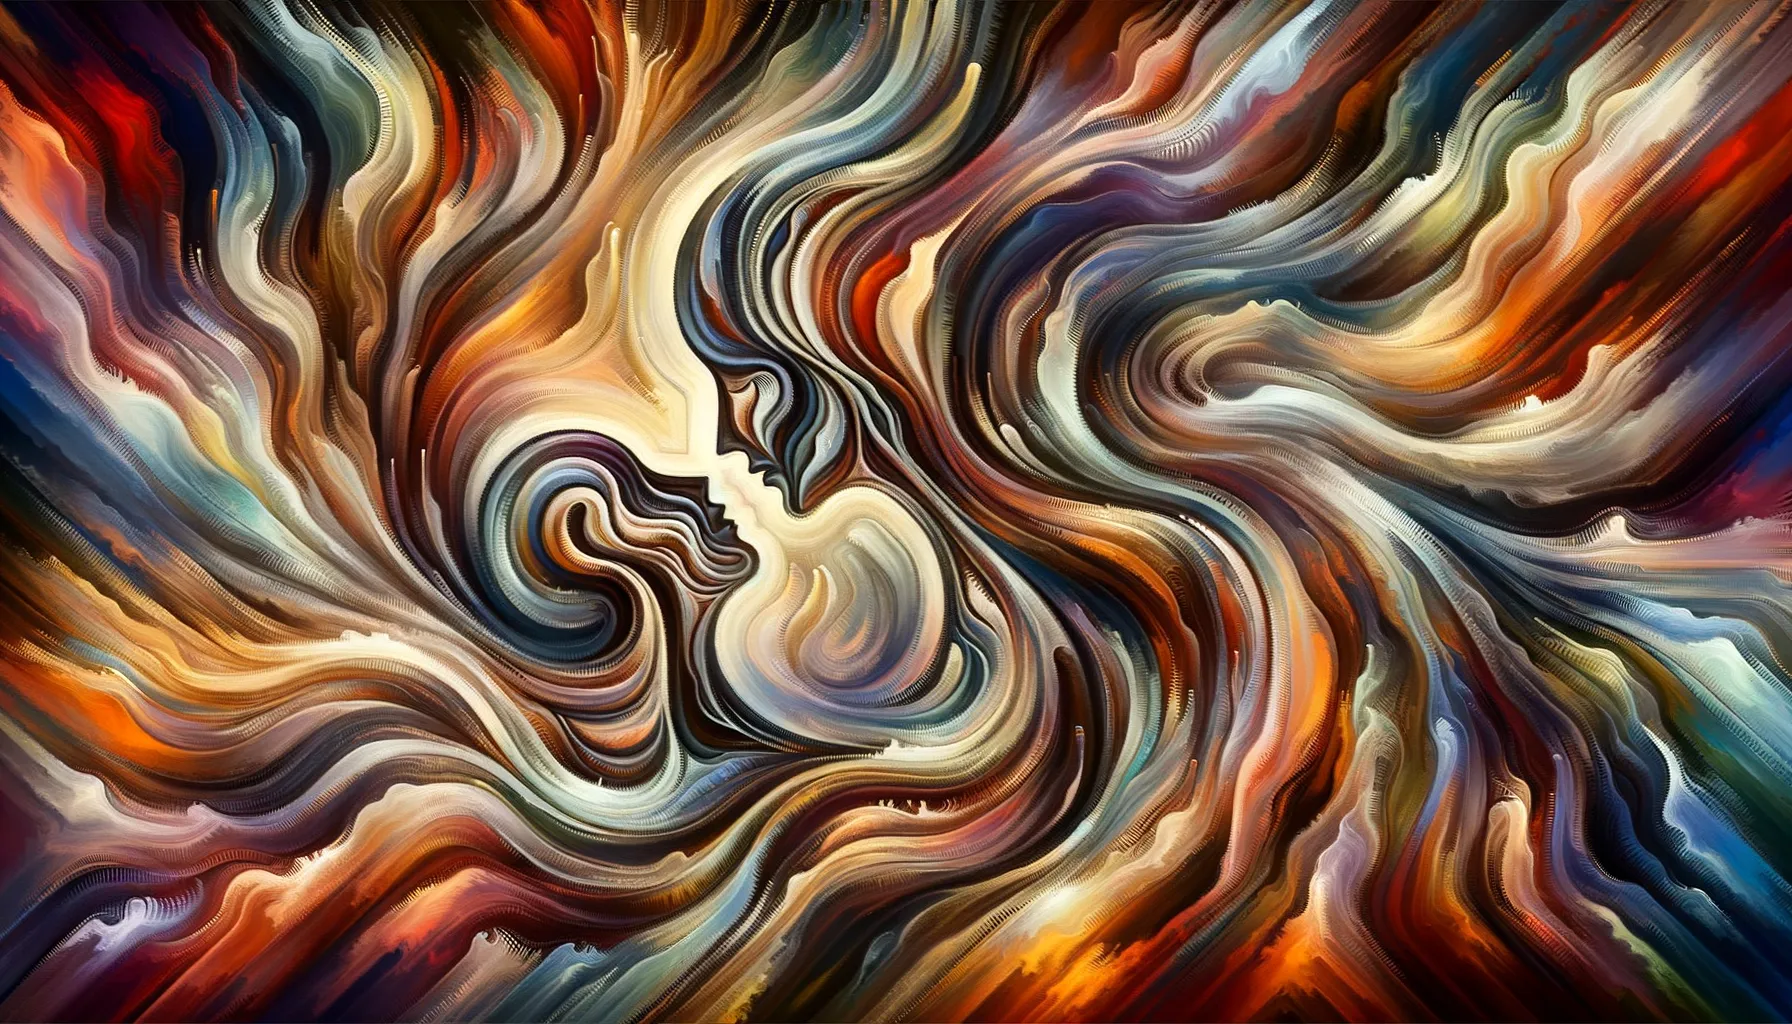 The dance of connection: a visual symphony of warmth and intuition, where the ebb and flow of emotional currents craft a tapestry unique to every partnership. Just as these abstract forms entwine, so do the intricate dynamics that define the games of the heart.